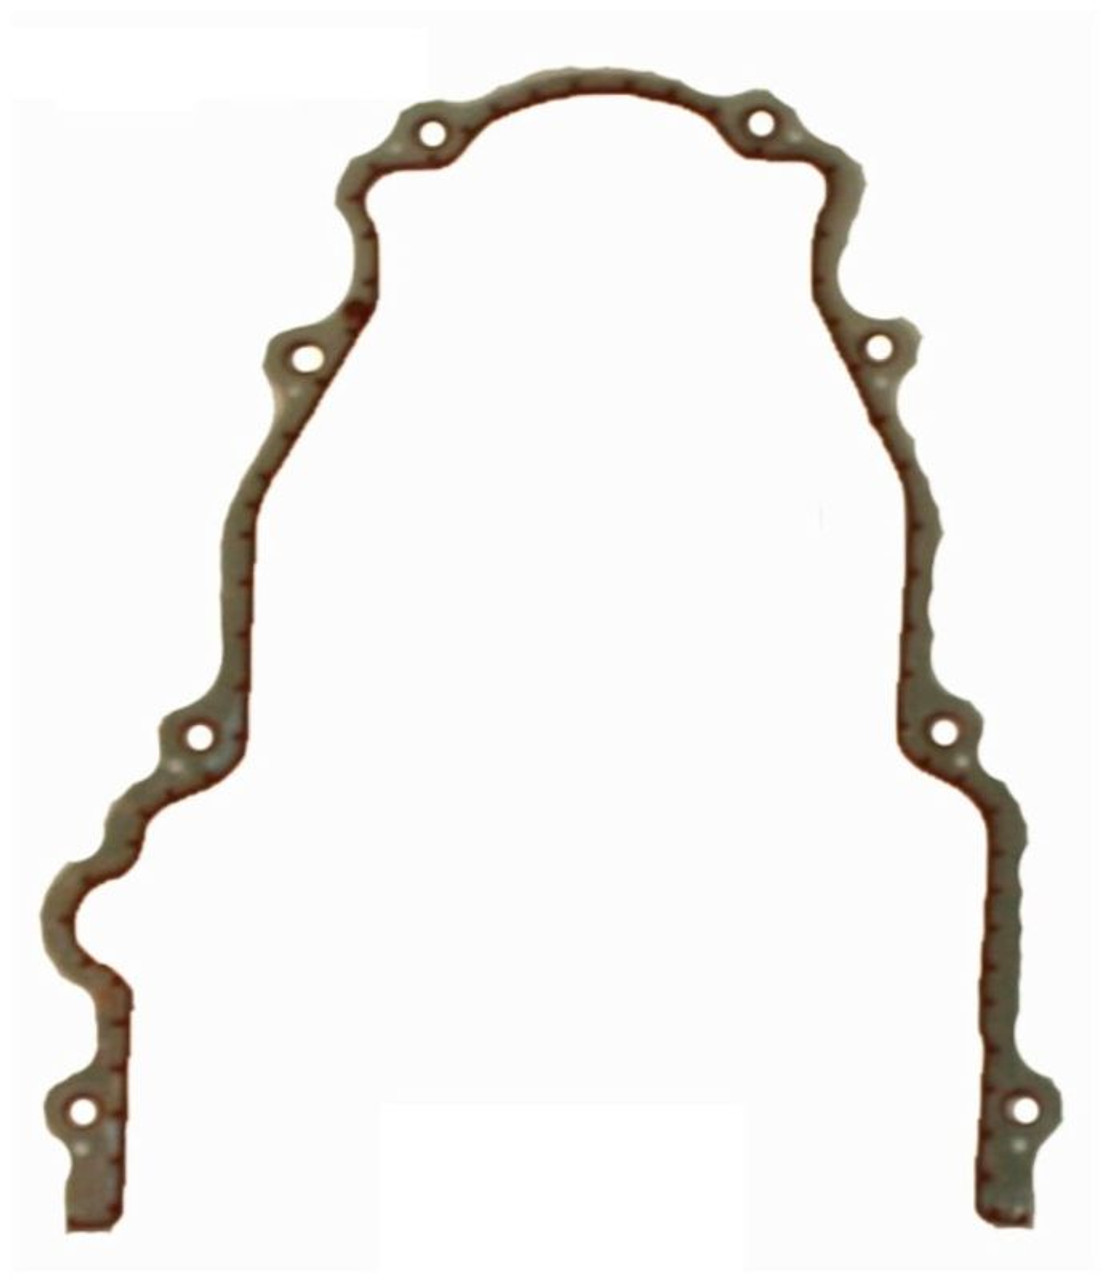 2003 Chevrolet Suburban 2500 6.0L Engine Timing Cover Gasket TCG293-A -139